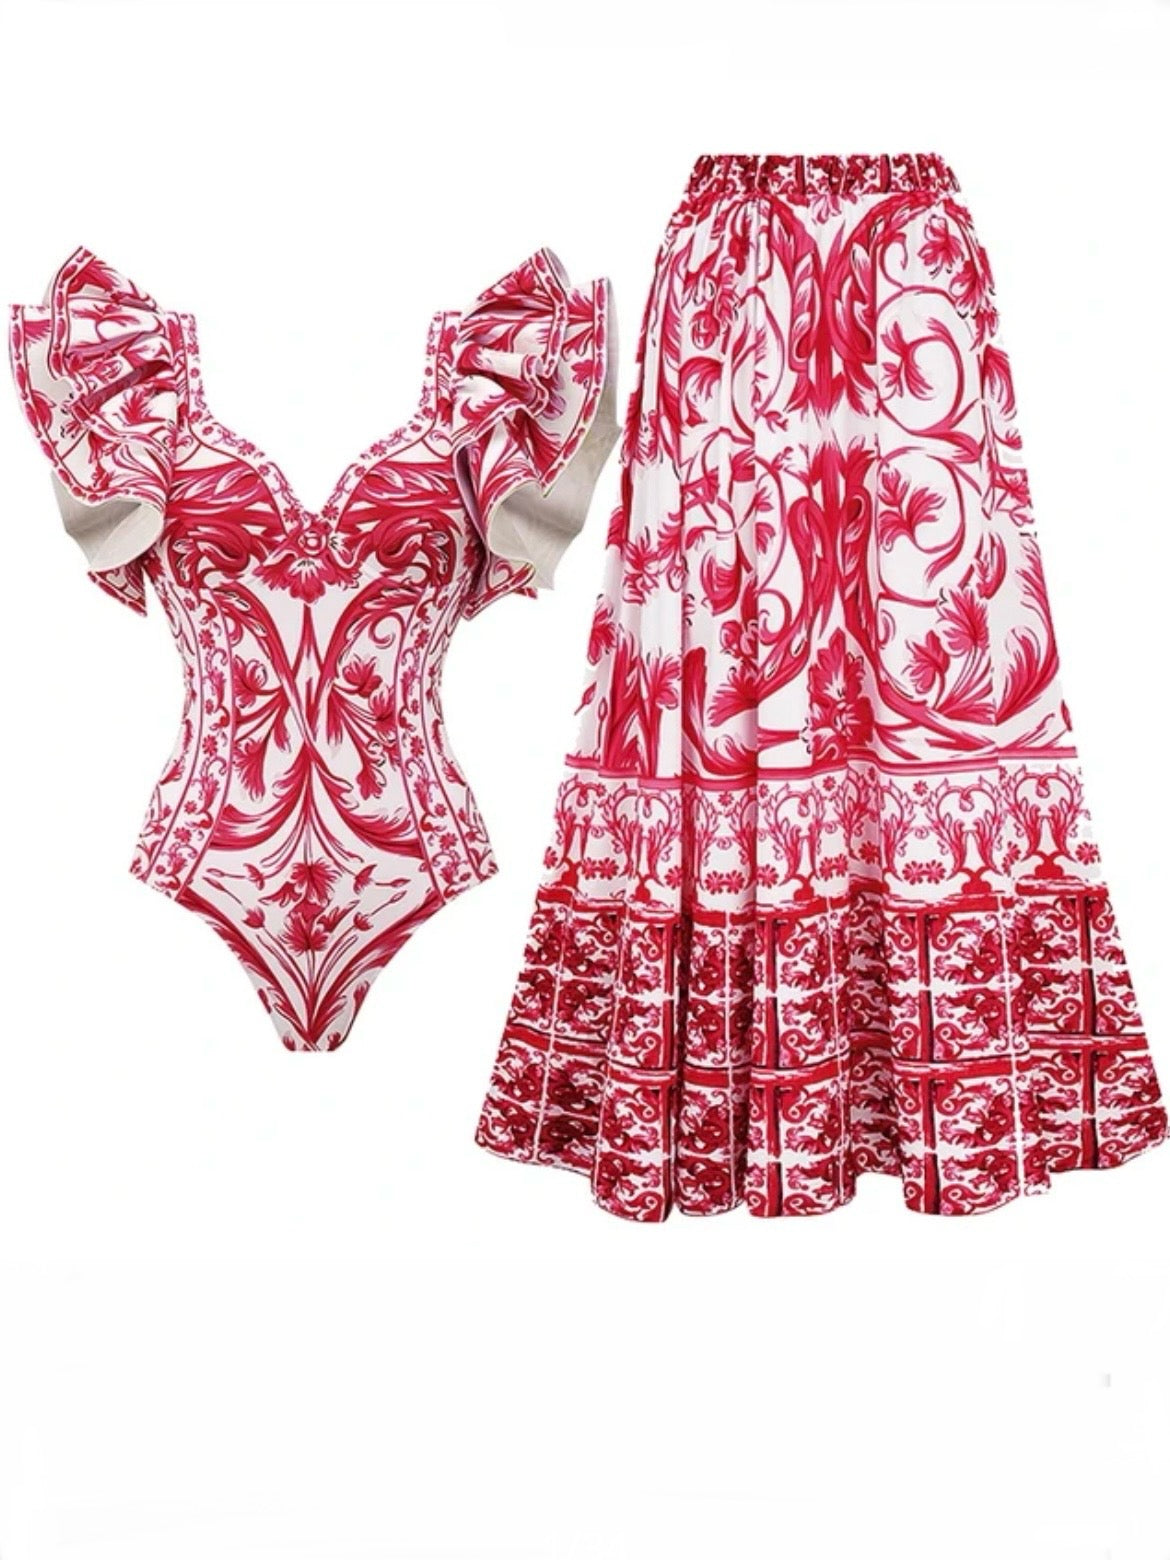 White and red set of 2 swimsuit and short floral printed